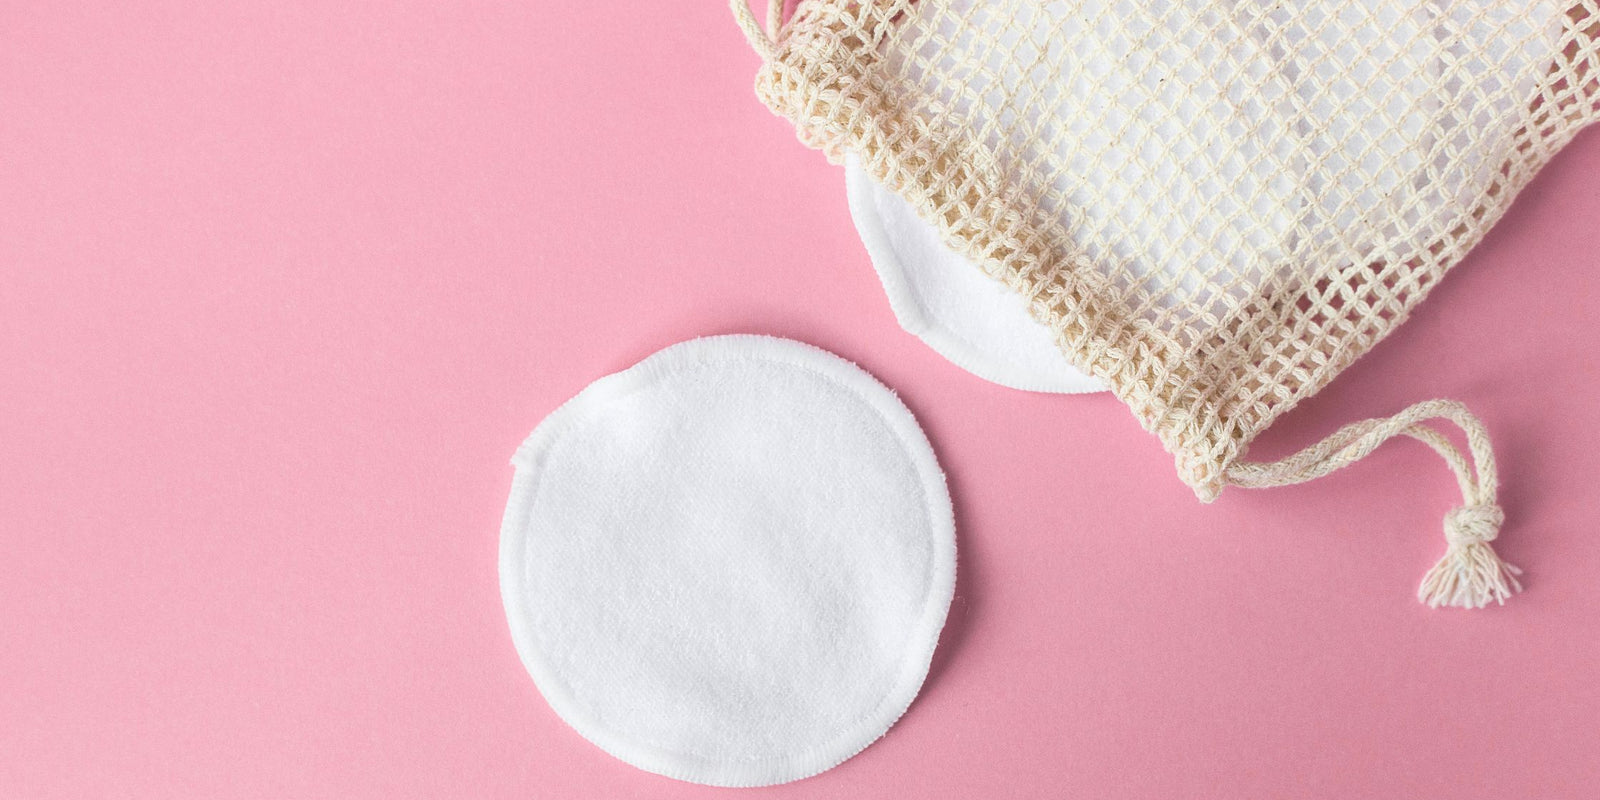 Unconventional but Genius: 7 Surprising Uses for Reusable Breast Pads